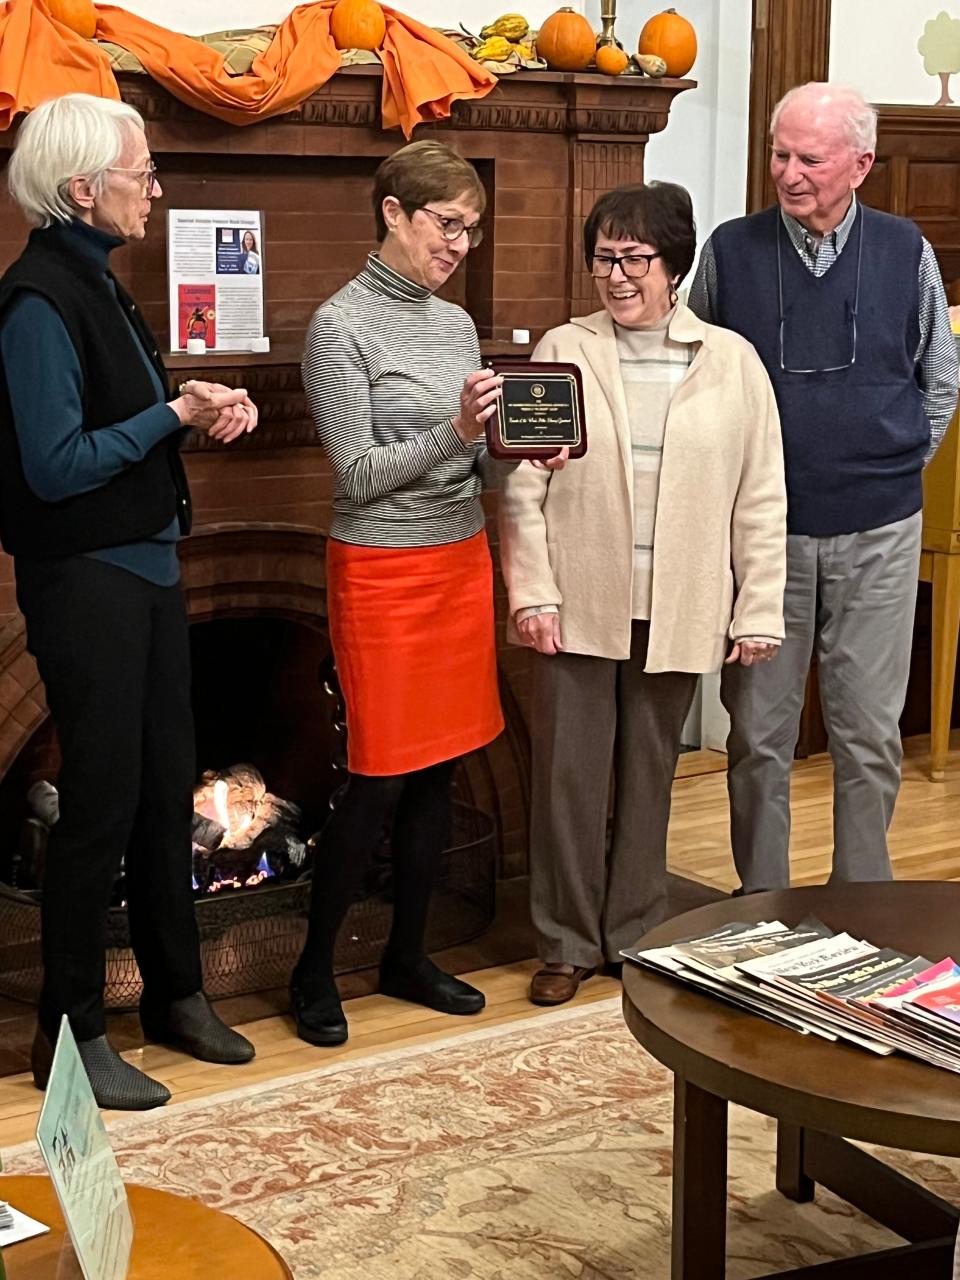 On Nov. 17, 2022 Katrinka Pellecchia of the New Hampshire Library Trustee Association presented the Friends of the Weeks Library with the 2022 Sue Palmatier Award for Friends group of the year. Friends Stuart Bauder, Debra Miesfeldt and Phyllis Picha accepted the award.